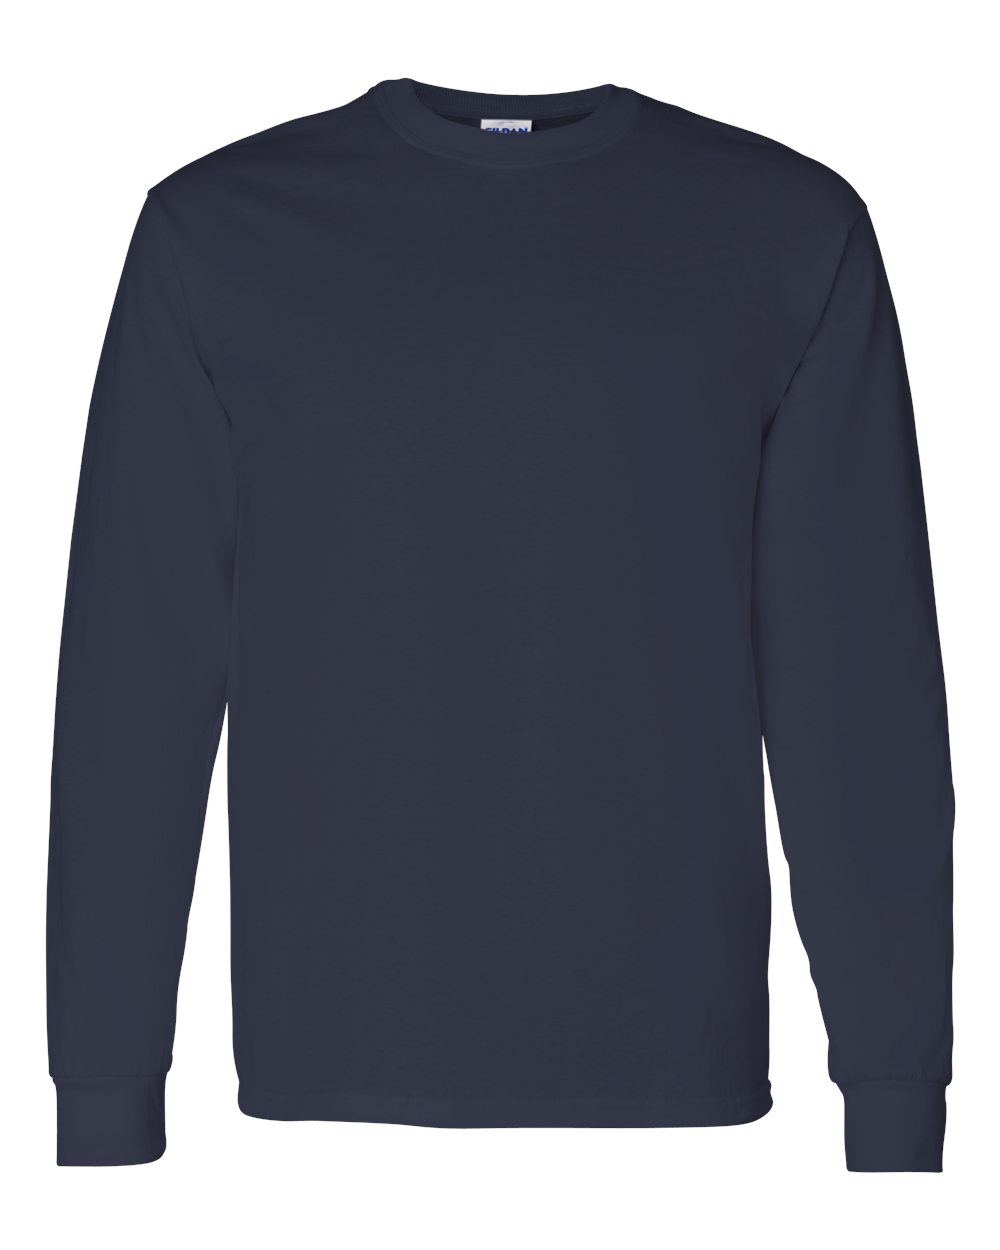 (UVF ONLY) Long Sleeve